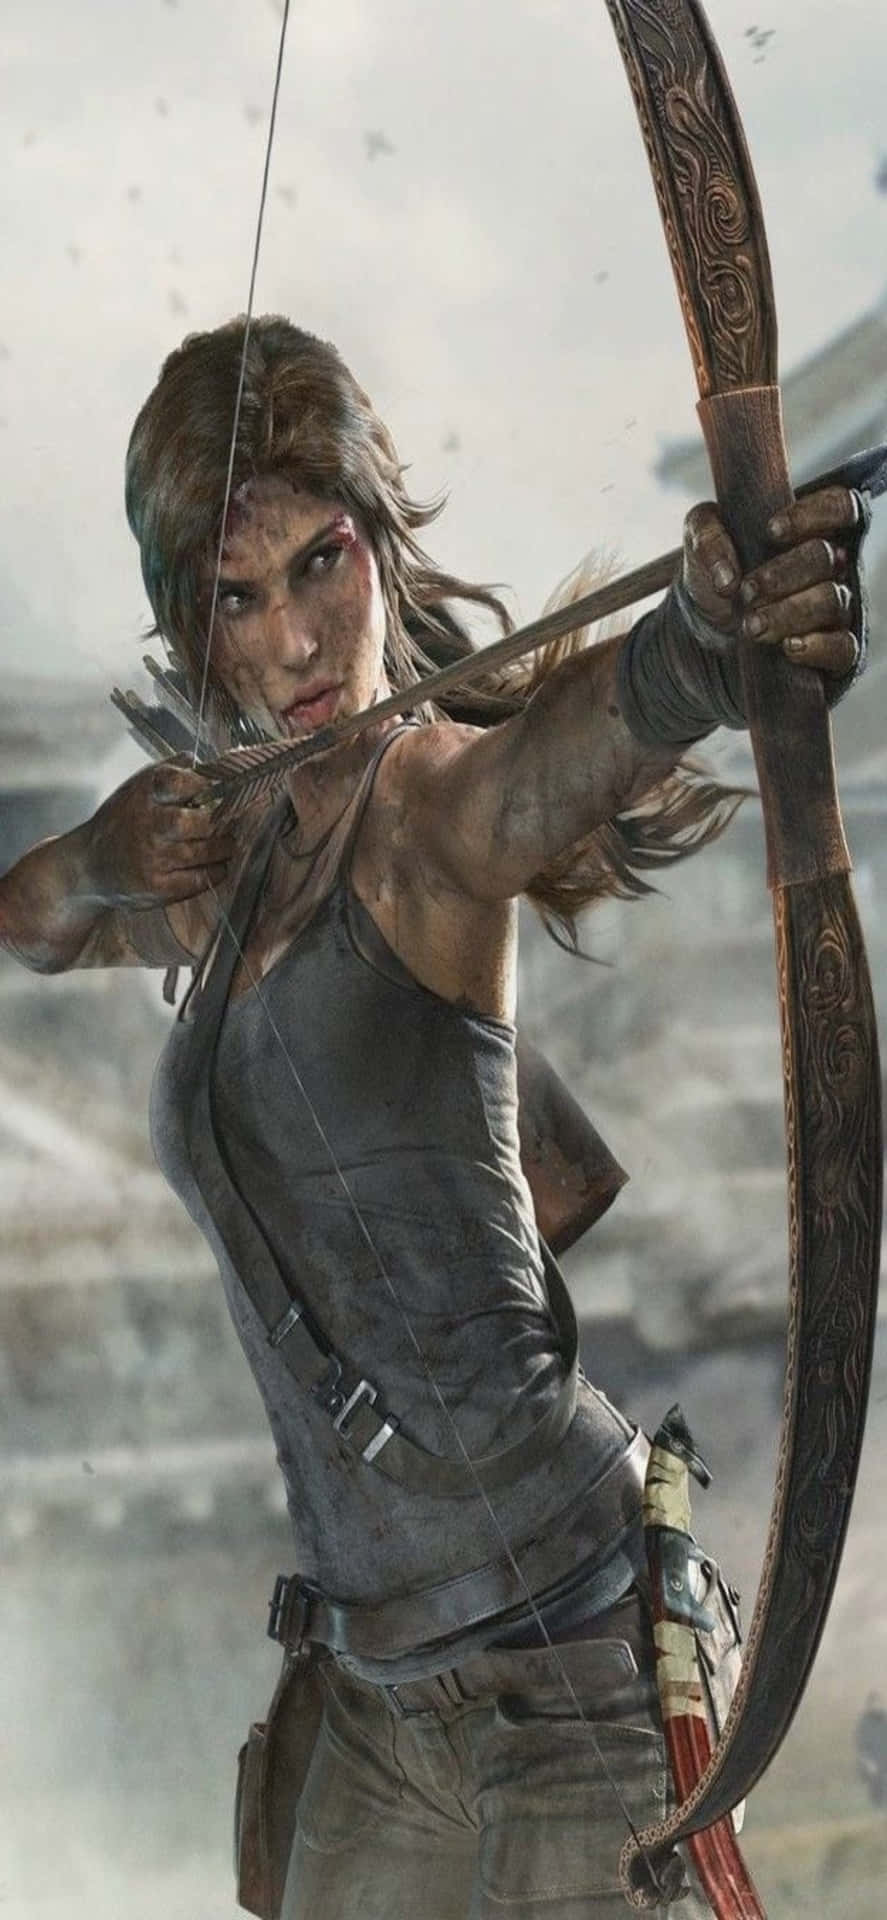 The Tomb Raider Is Holding A Bow And Arrow